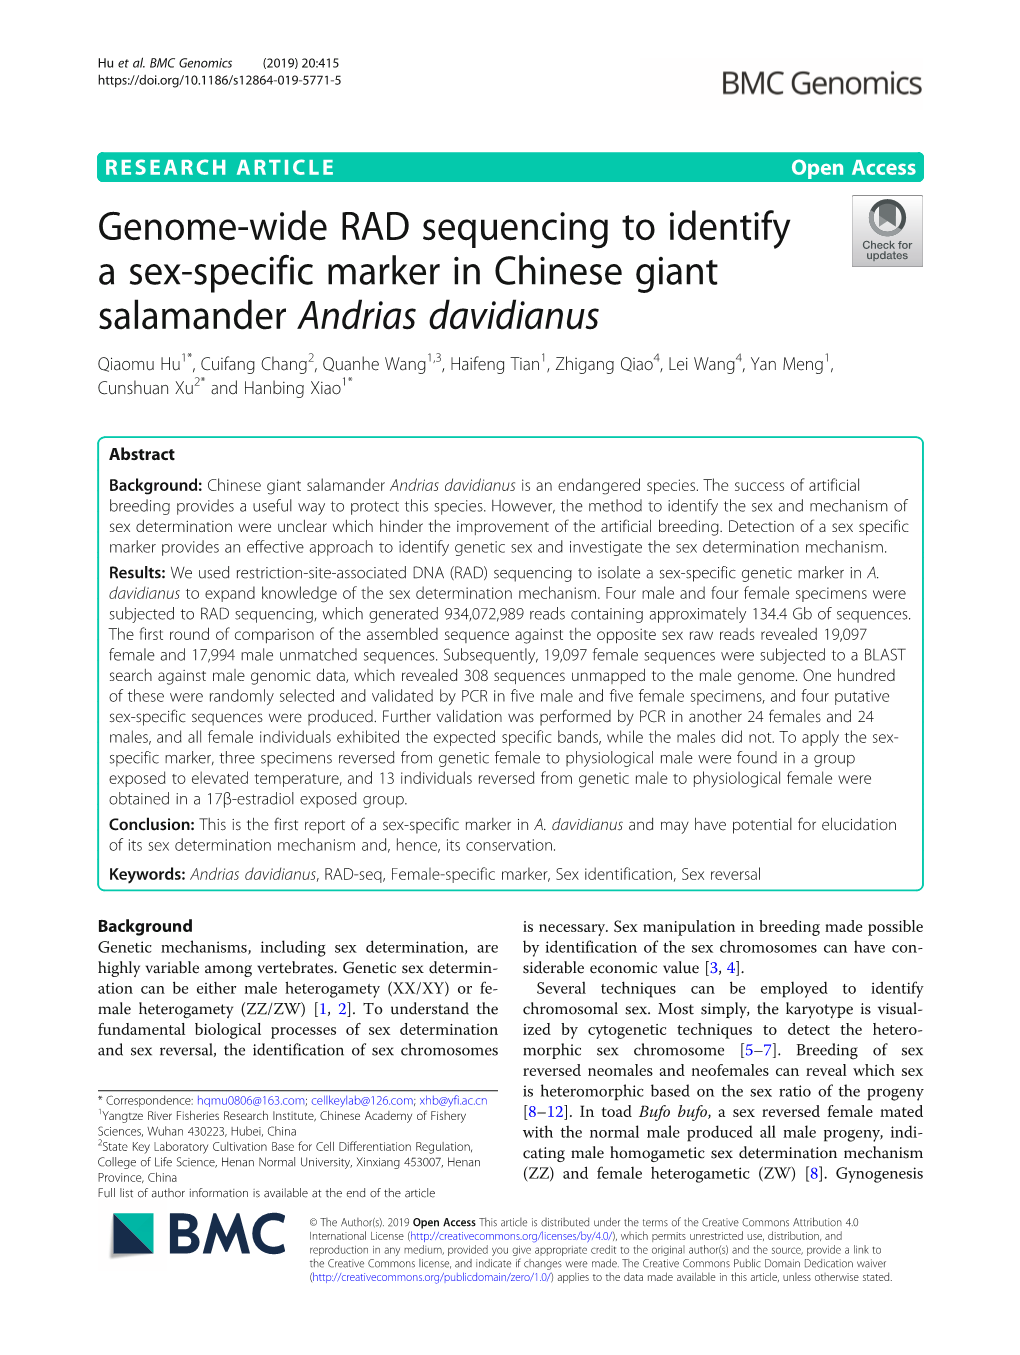 Genome-Wide RAD Sequencing to Identify a Sex-Specific Marker In